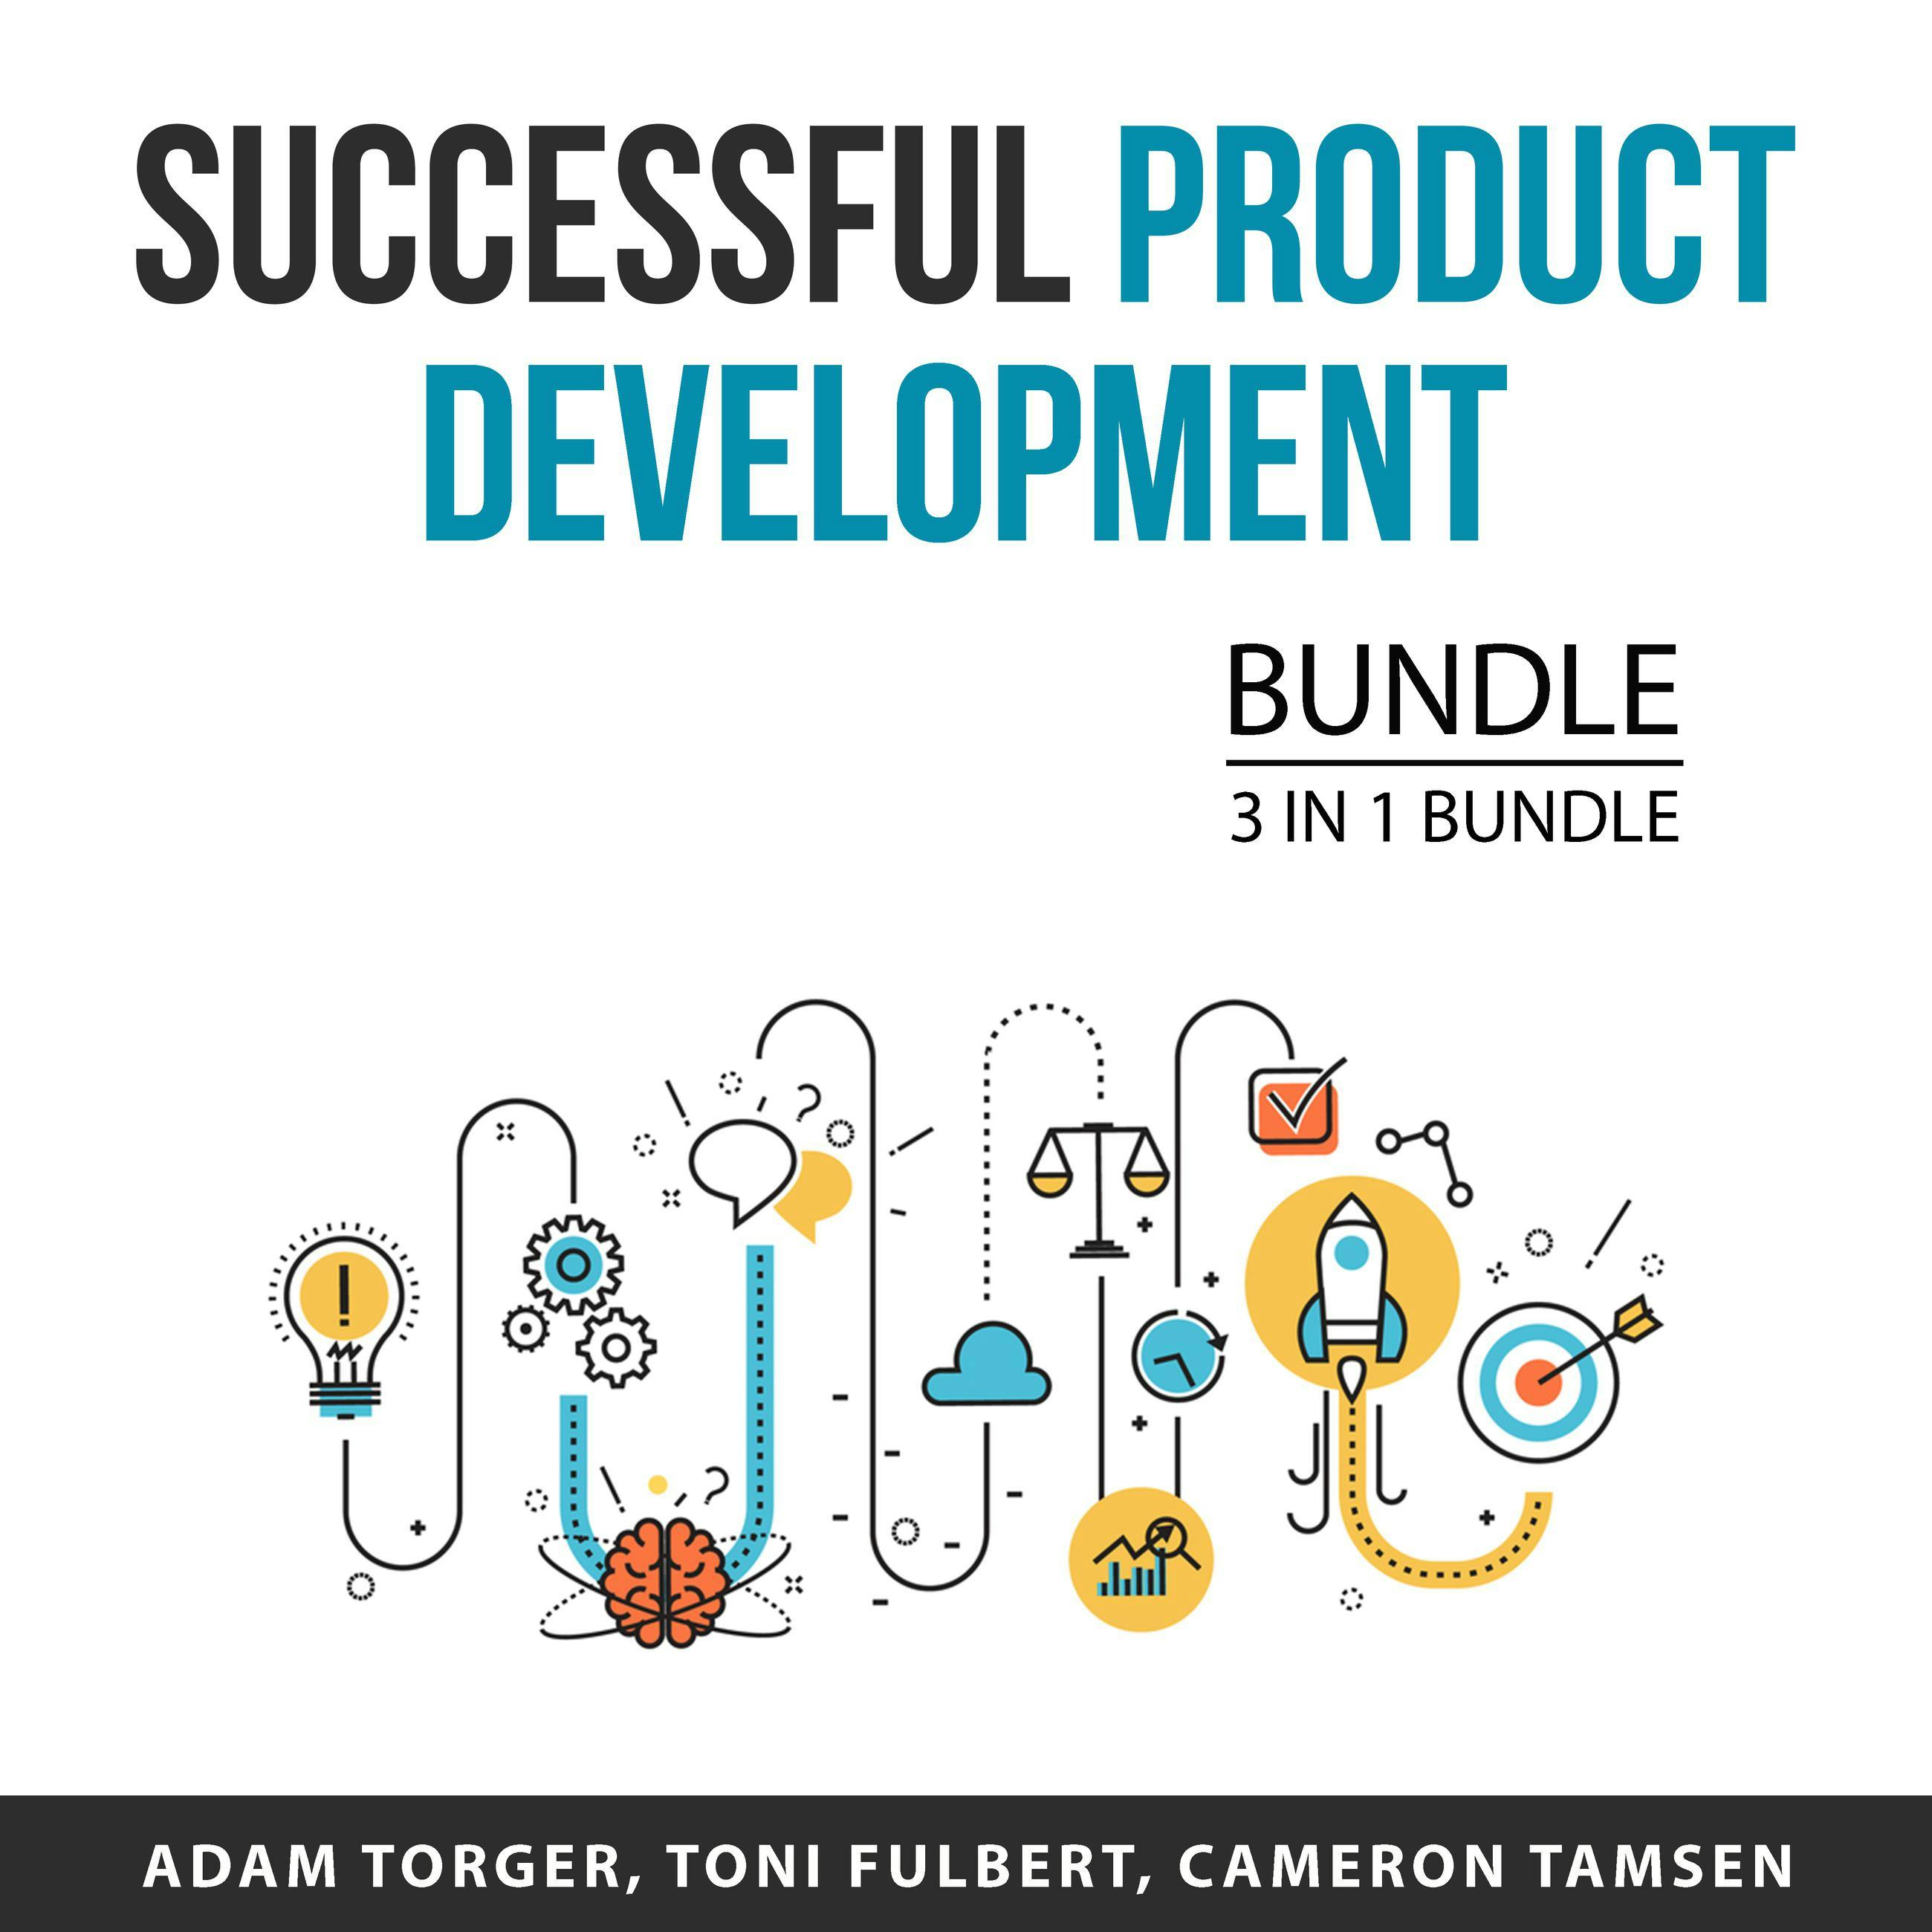 Successful Product Development Bundle, 3 in 1 Bundle: Product Creation Blueprint, Product Launch Mastery, and Digital Product Development - undefined